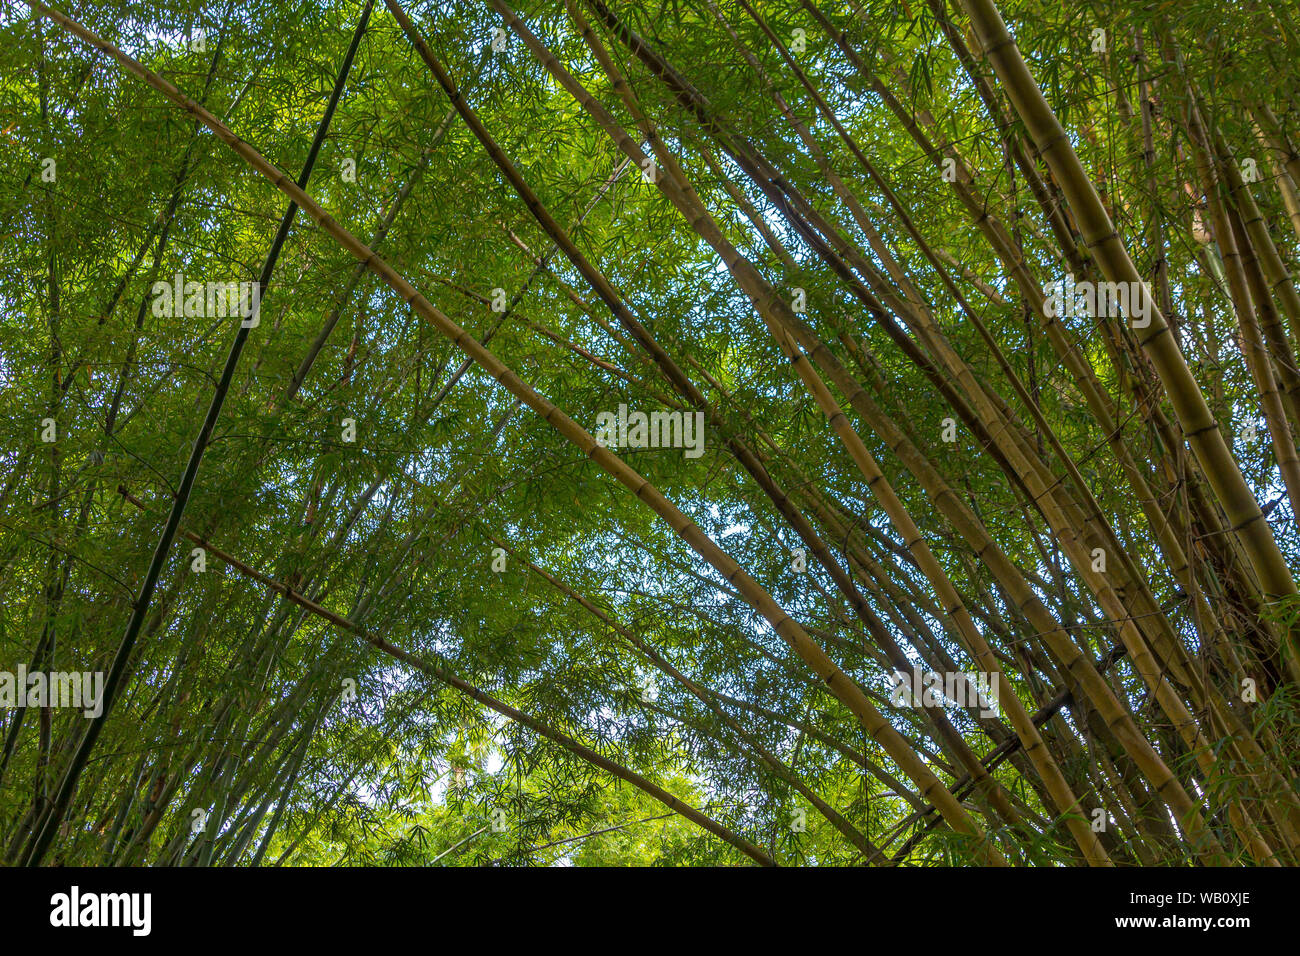 Real bamboo trees forest, with vivid green color making a beautiful background pattern Stock Photo